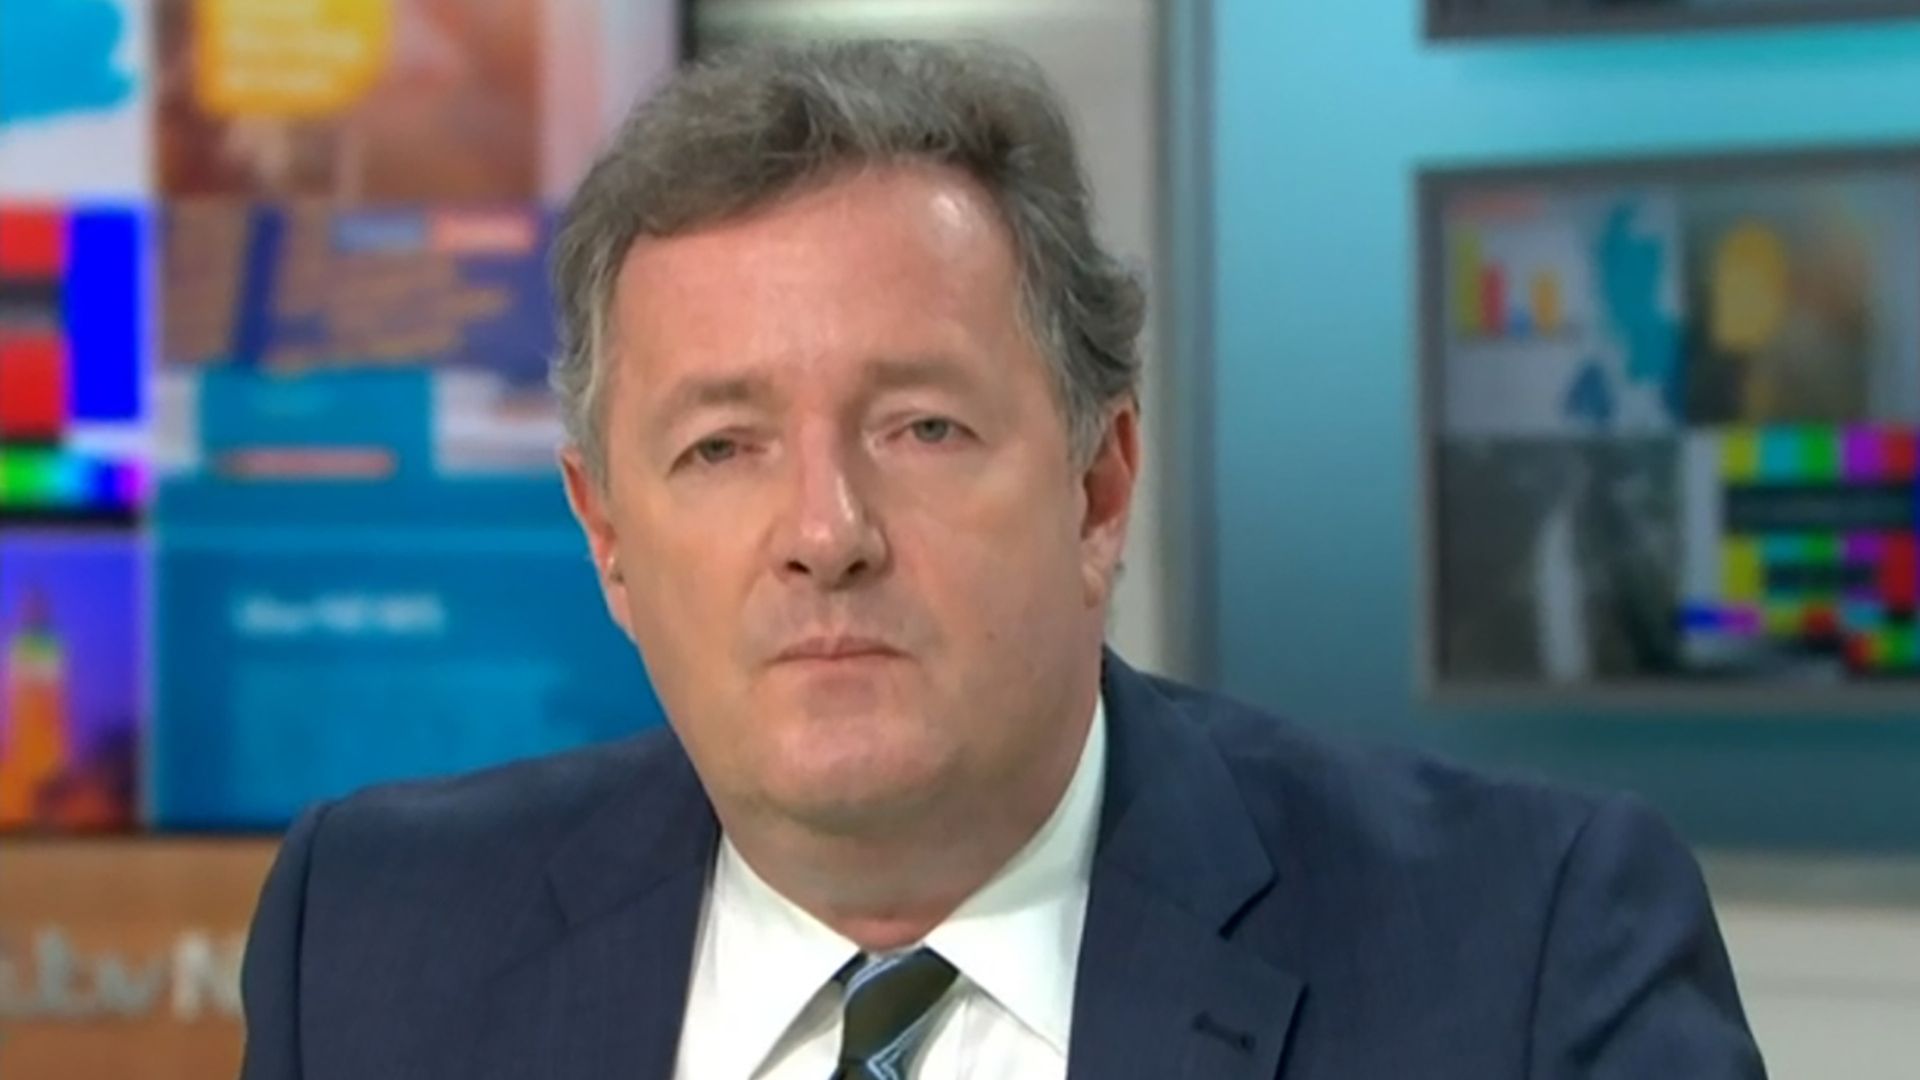 piers angry at pm